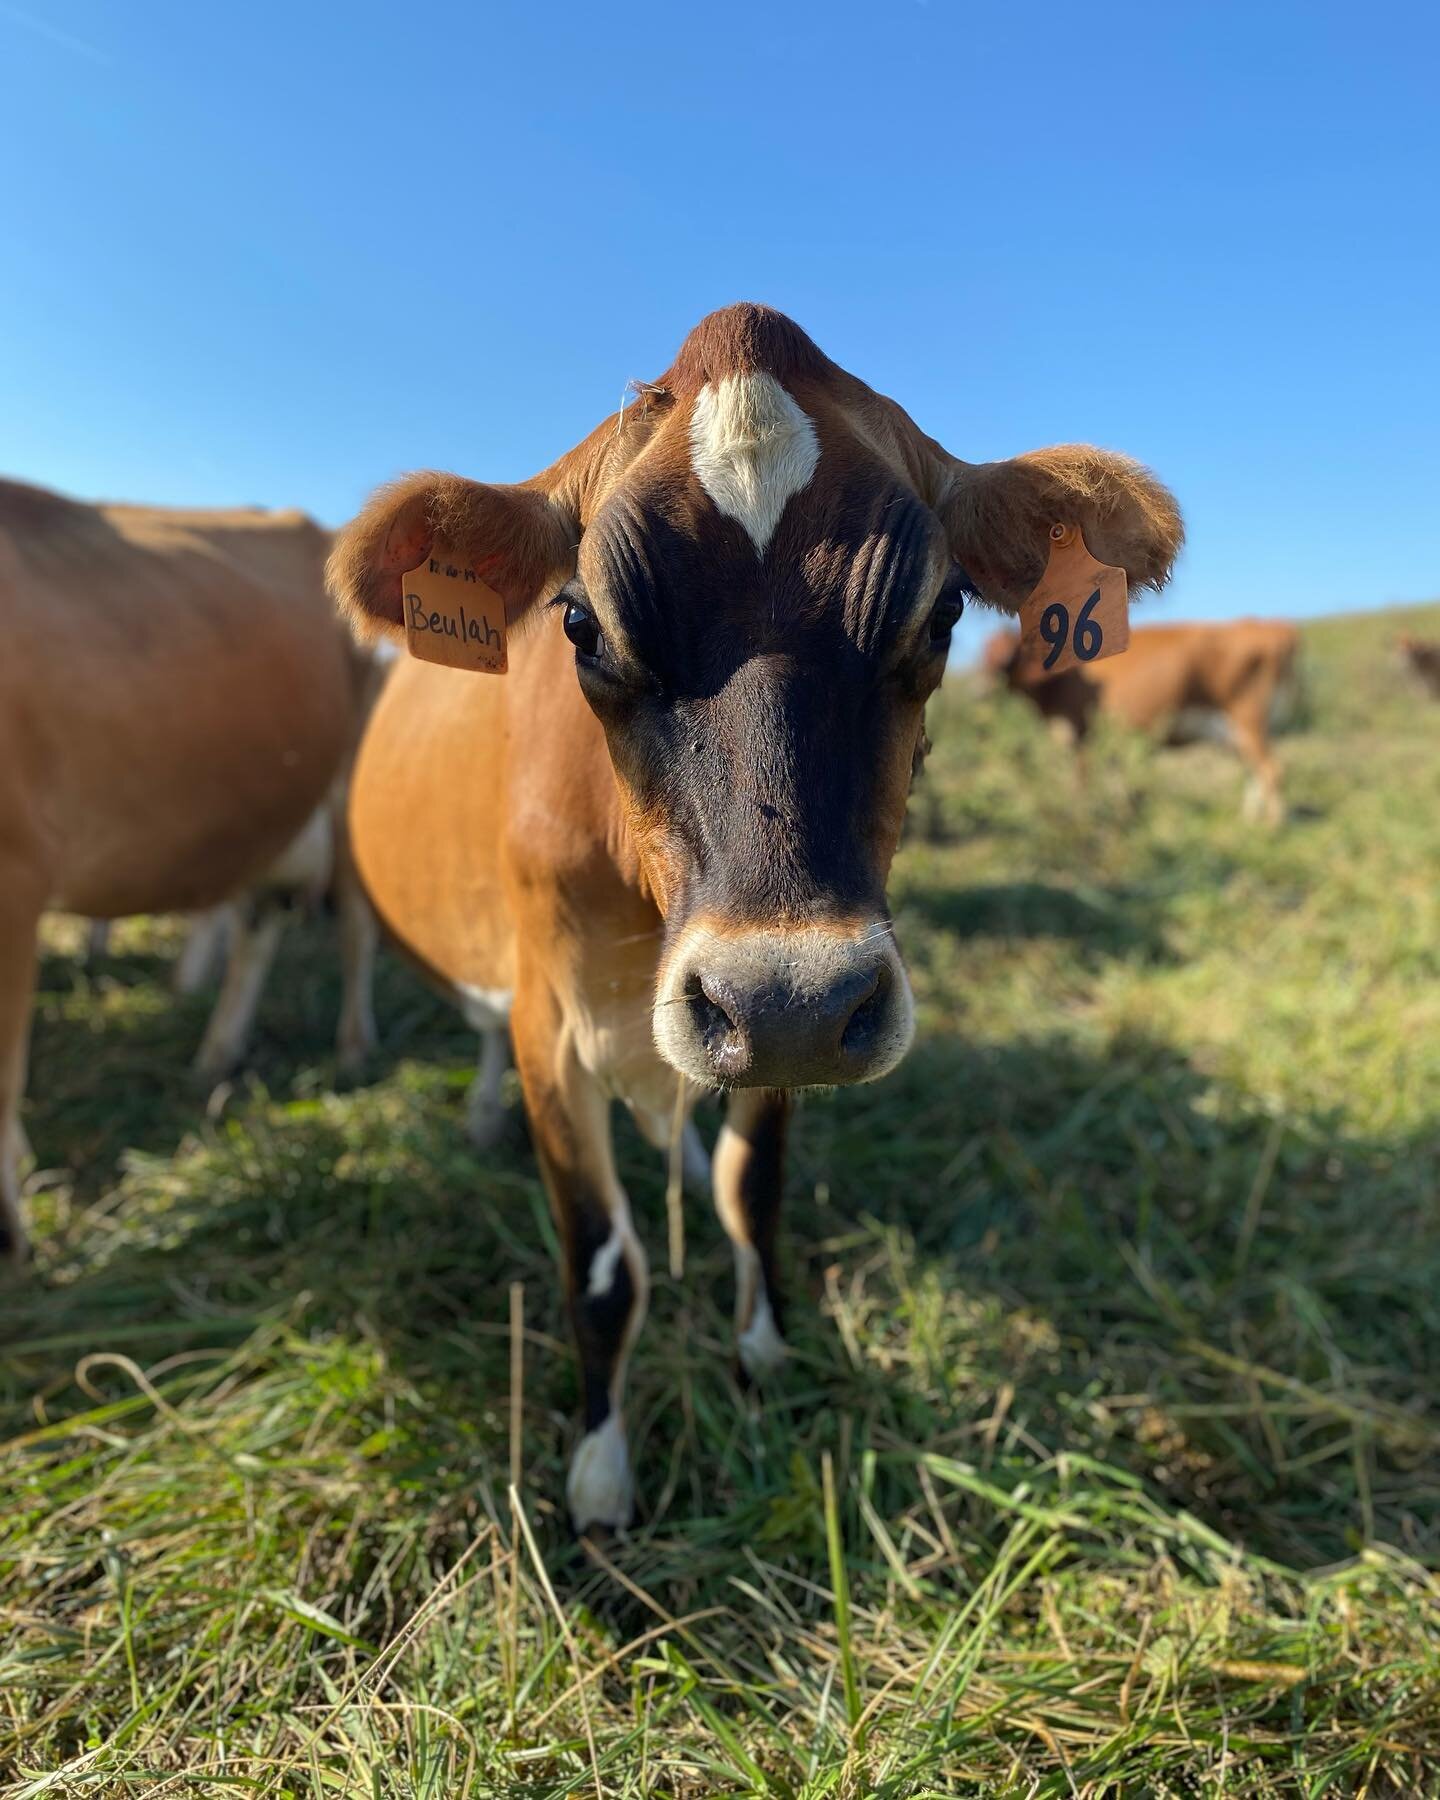 Meet the cow of the week, Beulah! Named after Ben&rsquo;s first Jersey that he bought and hand-milked in 2008, Beulah is a special cow. :)
Beulah is young and is in her first lactation as a milking cow. She was born and raised here at Creambrook!
She